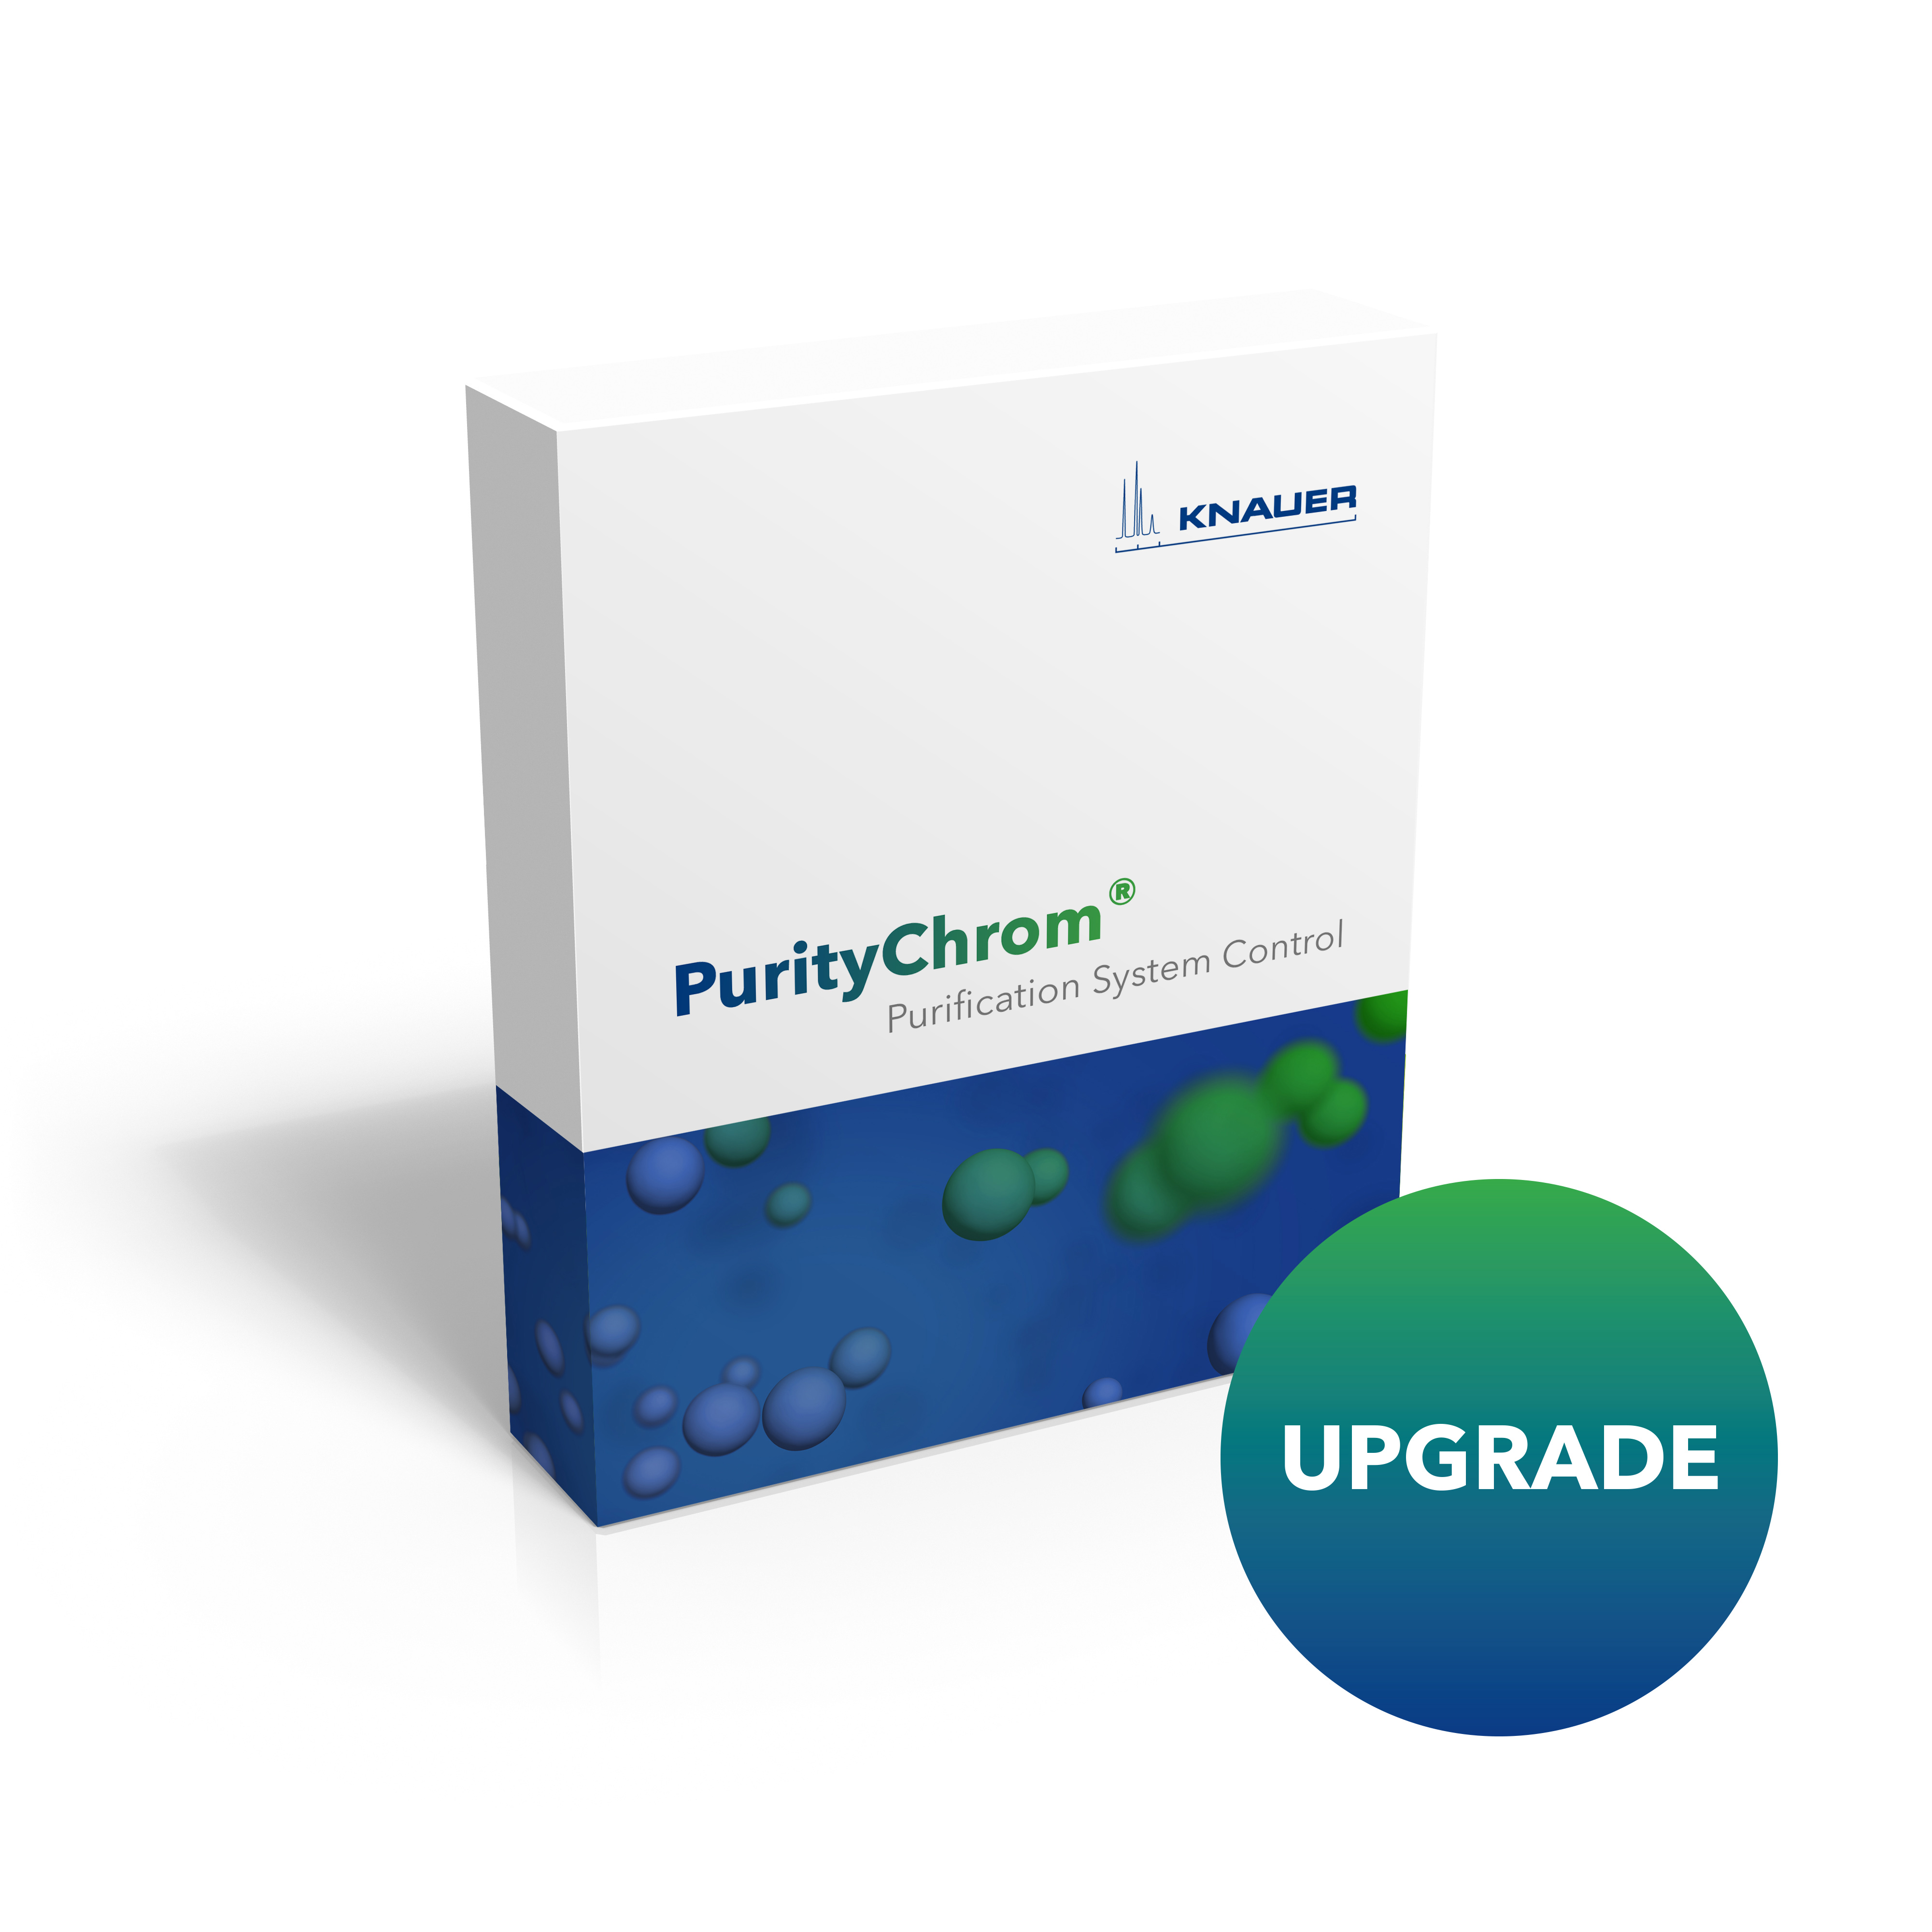 Puritychrom upgrade: Extends the Basic License to an unlimited number of controllable devices and 8 data channels, adds autosampler support